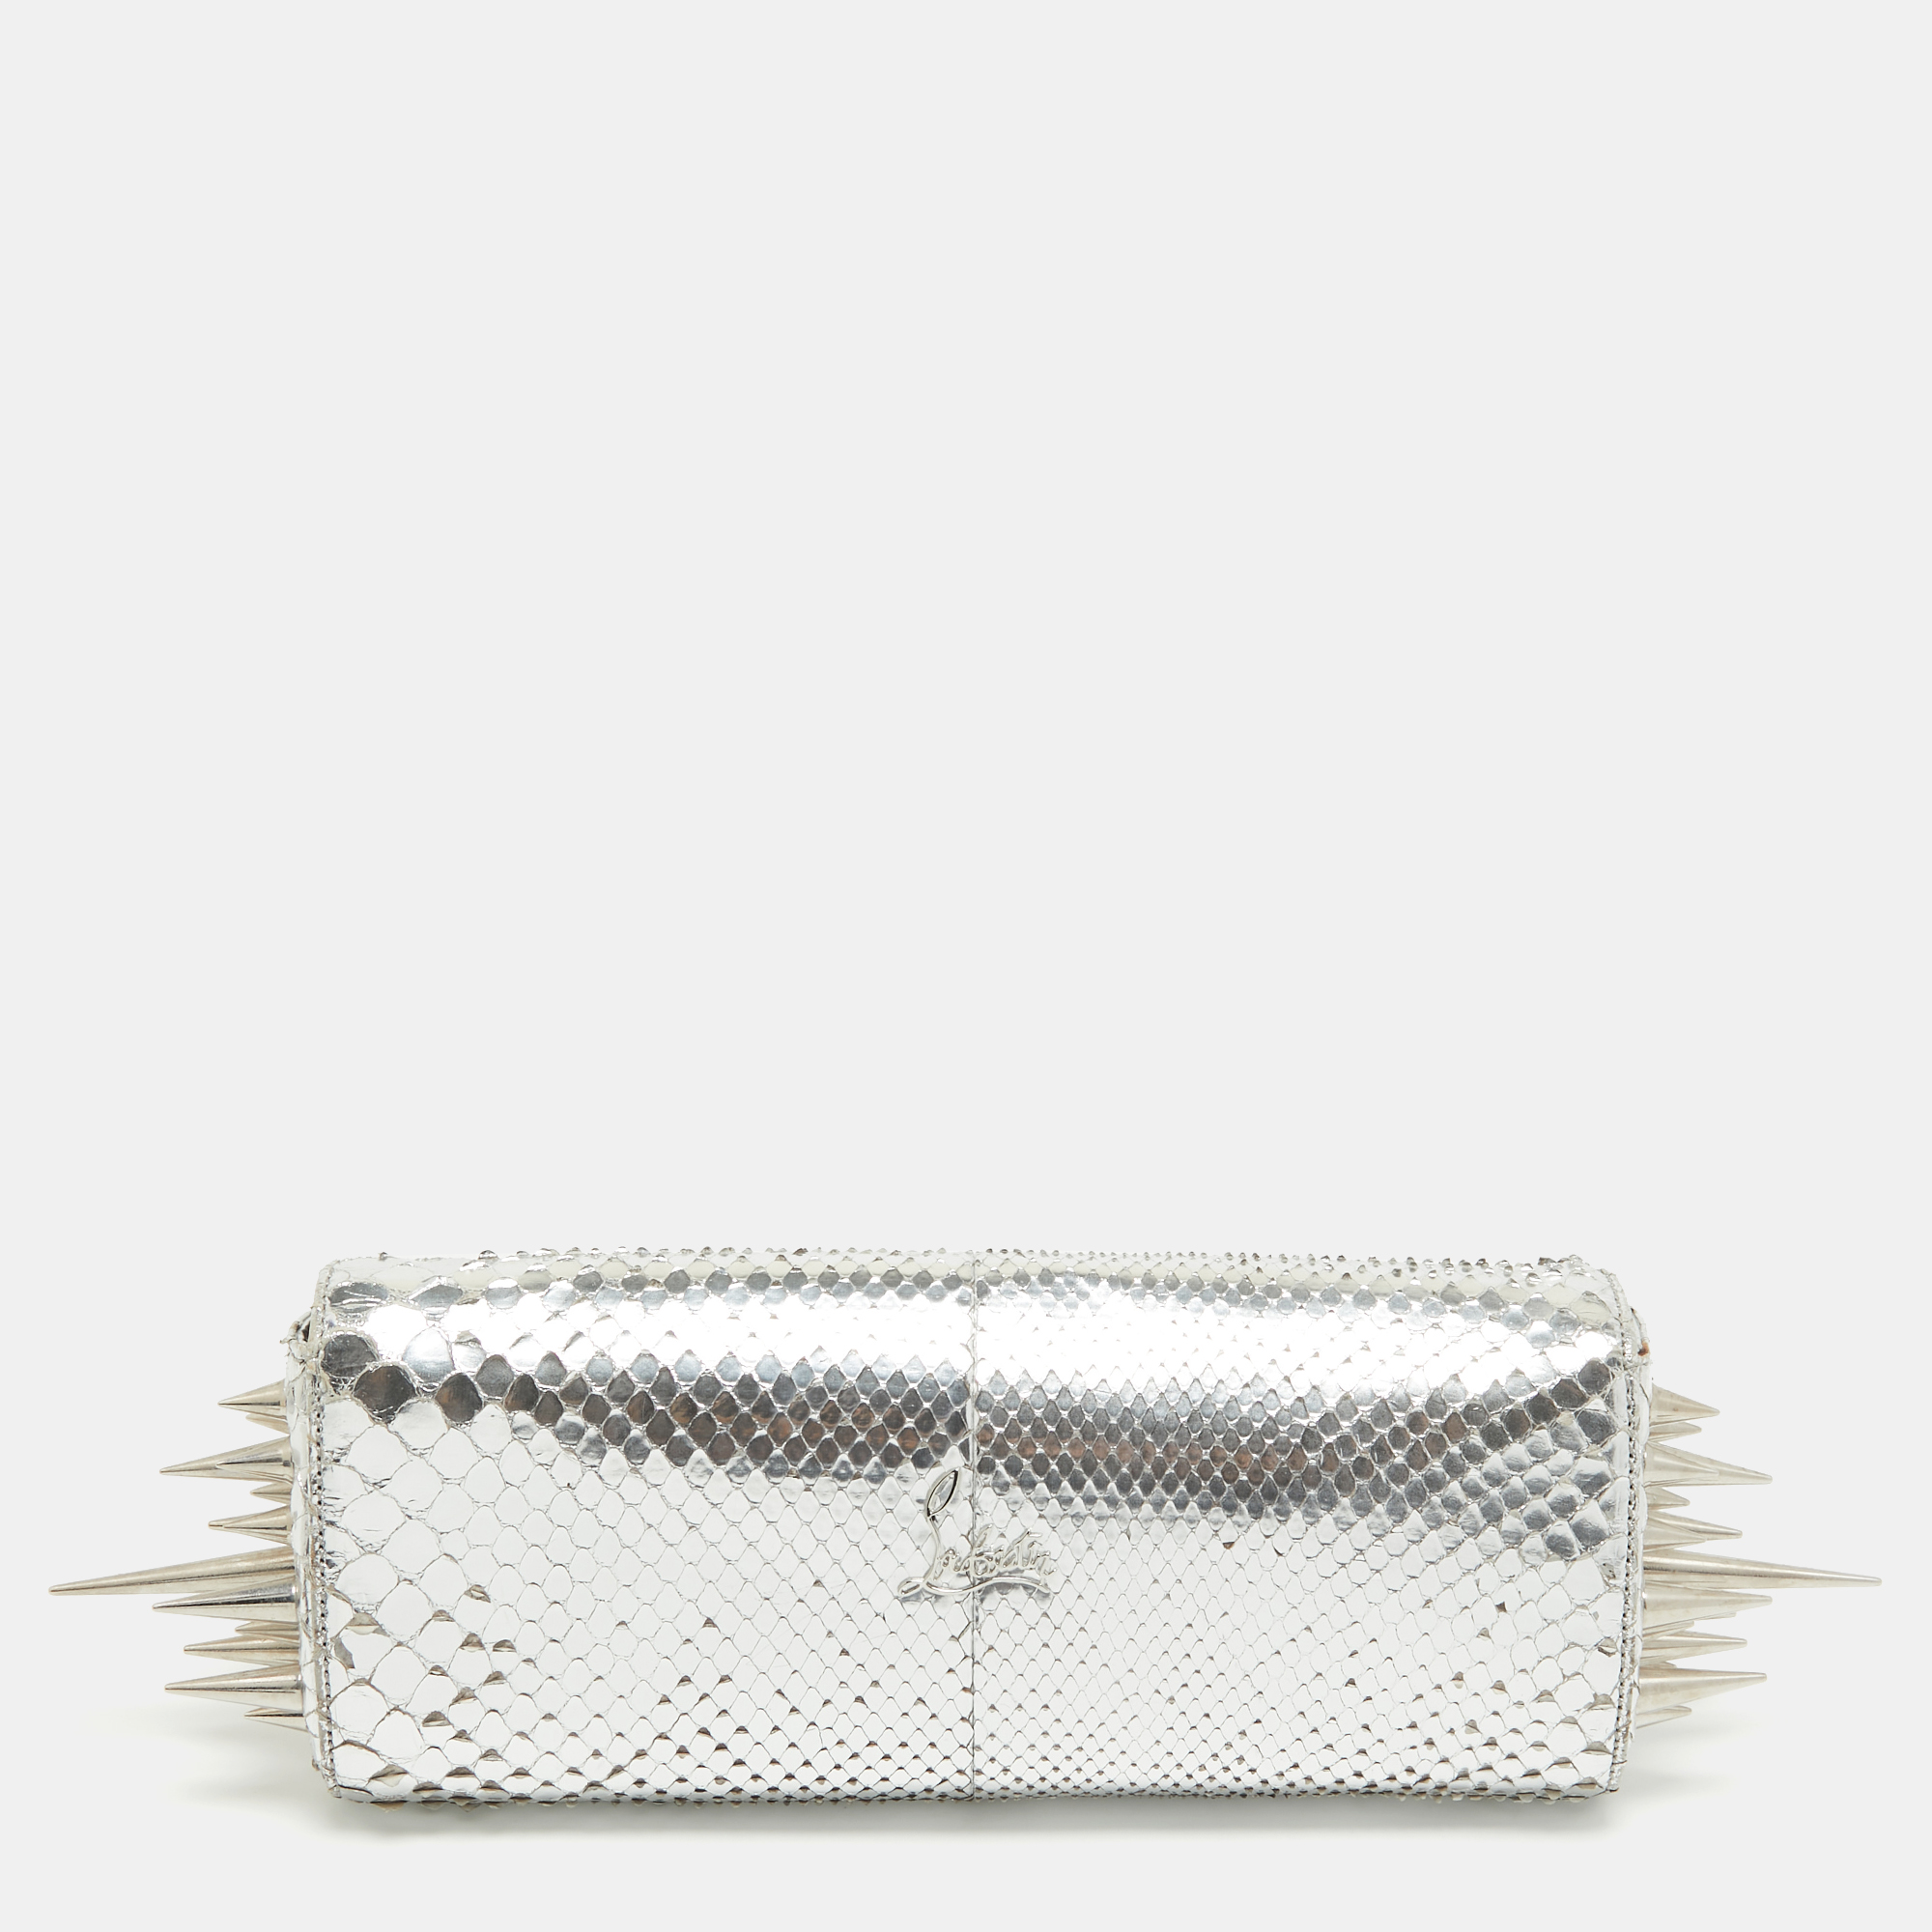 Pre-owned Christian Louboutin Silver Python Marquise Spiked Clutch